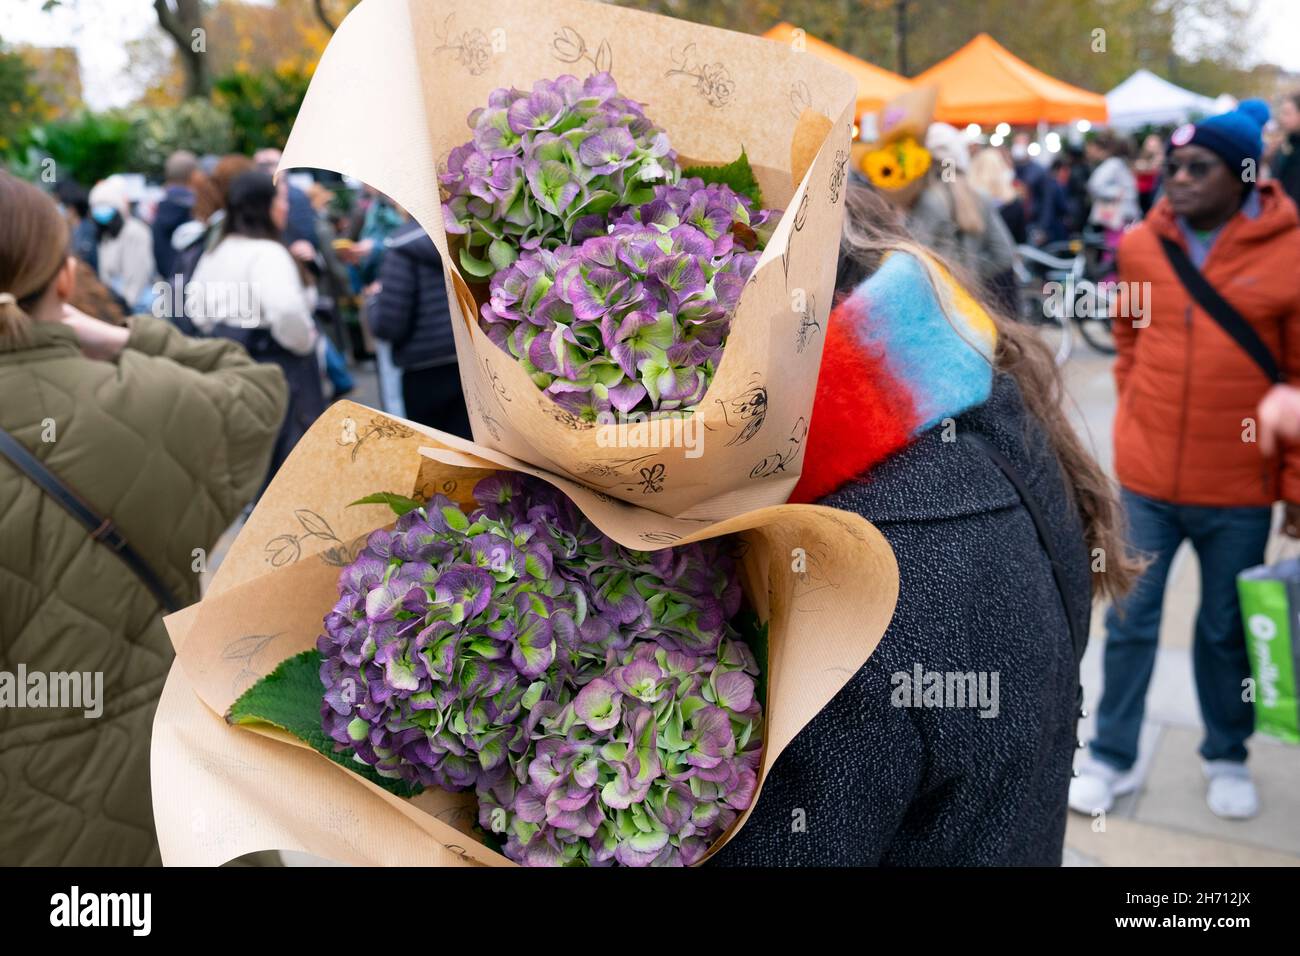 Columbia Road Flower Market people buying plants flowers in the street at market stalls on Sunday in November 2021 East London UK KATHY DEWITT Stock Photo